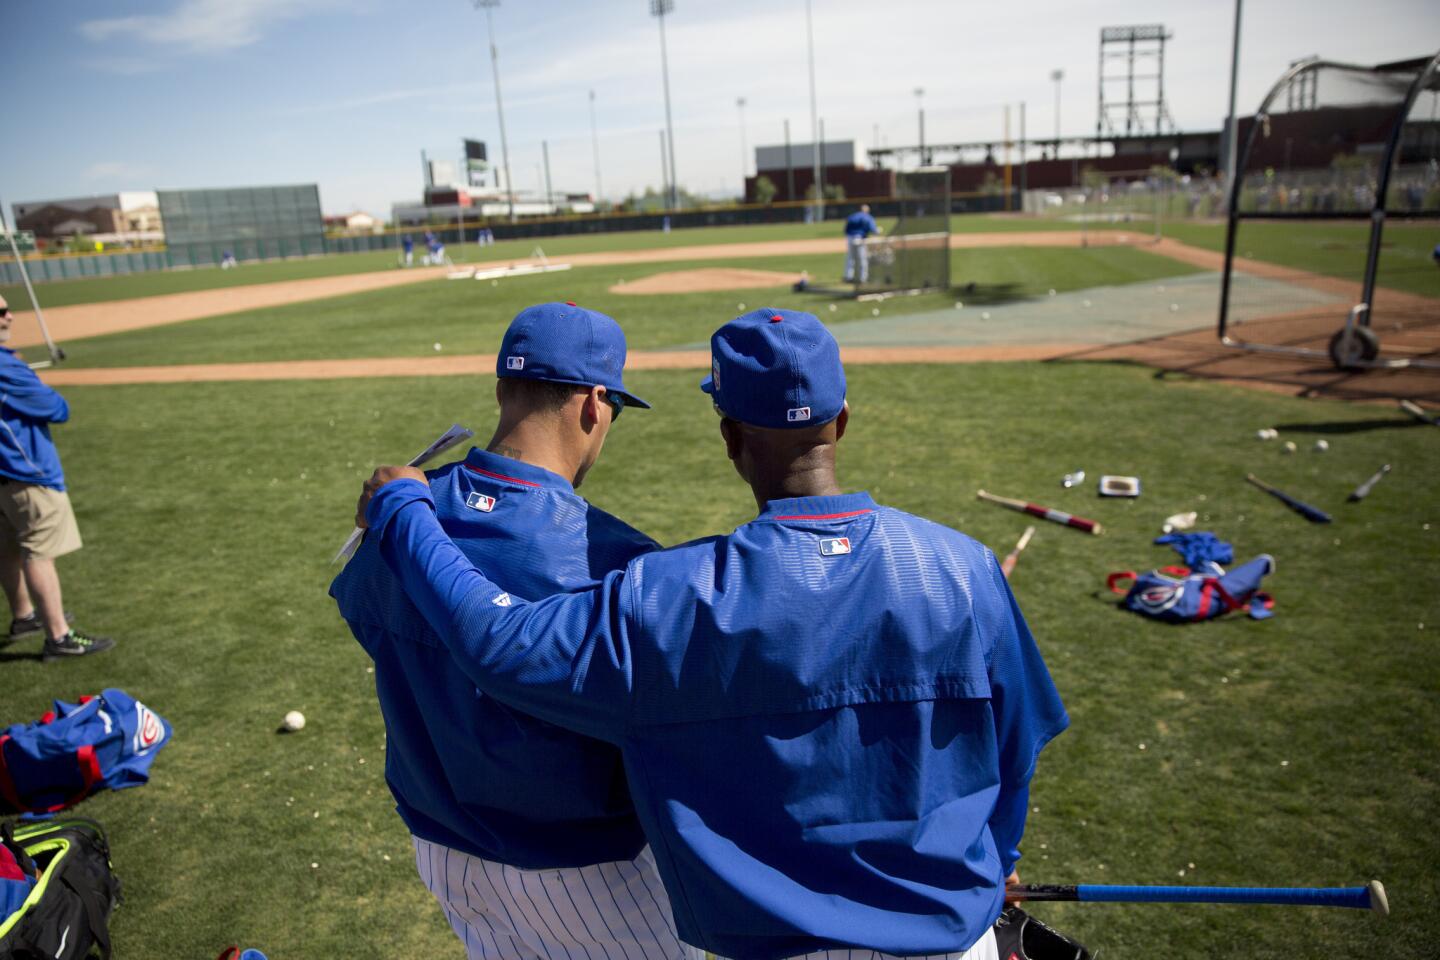 From left, Javier Baez talks with Gary Jones during spring training at Sloan Park on Monday, Feb. 29, 2016, in Mesa, Ariz.